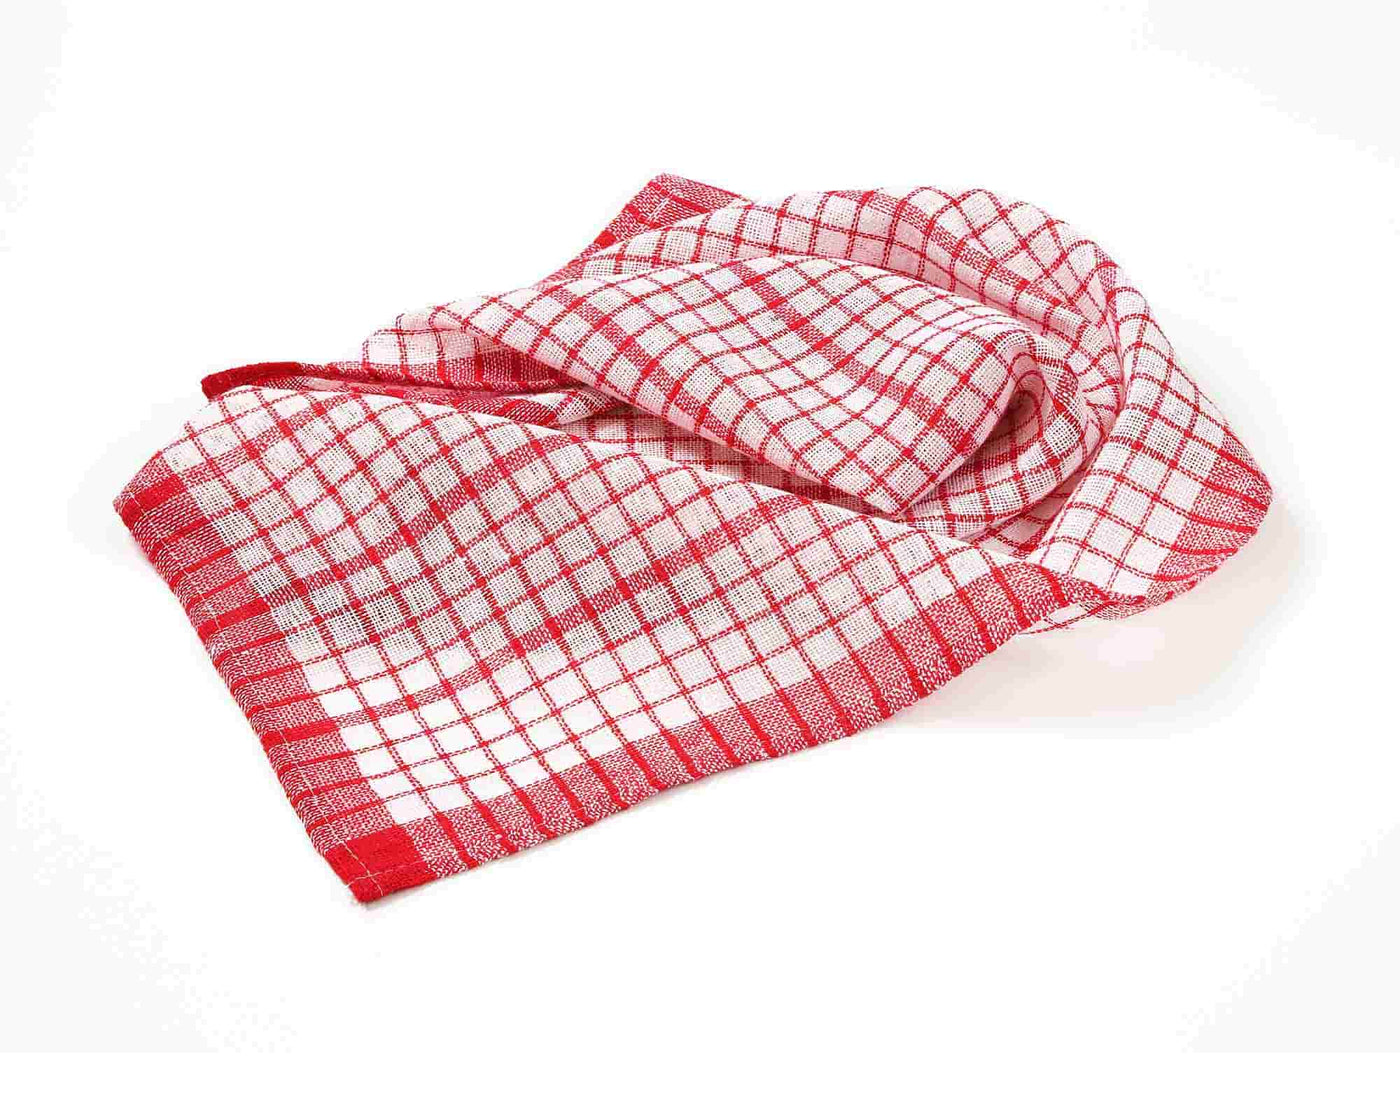 red patterned tea towel on white background